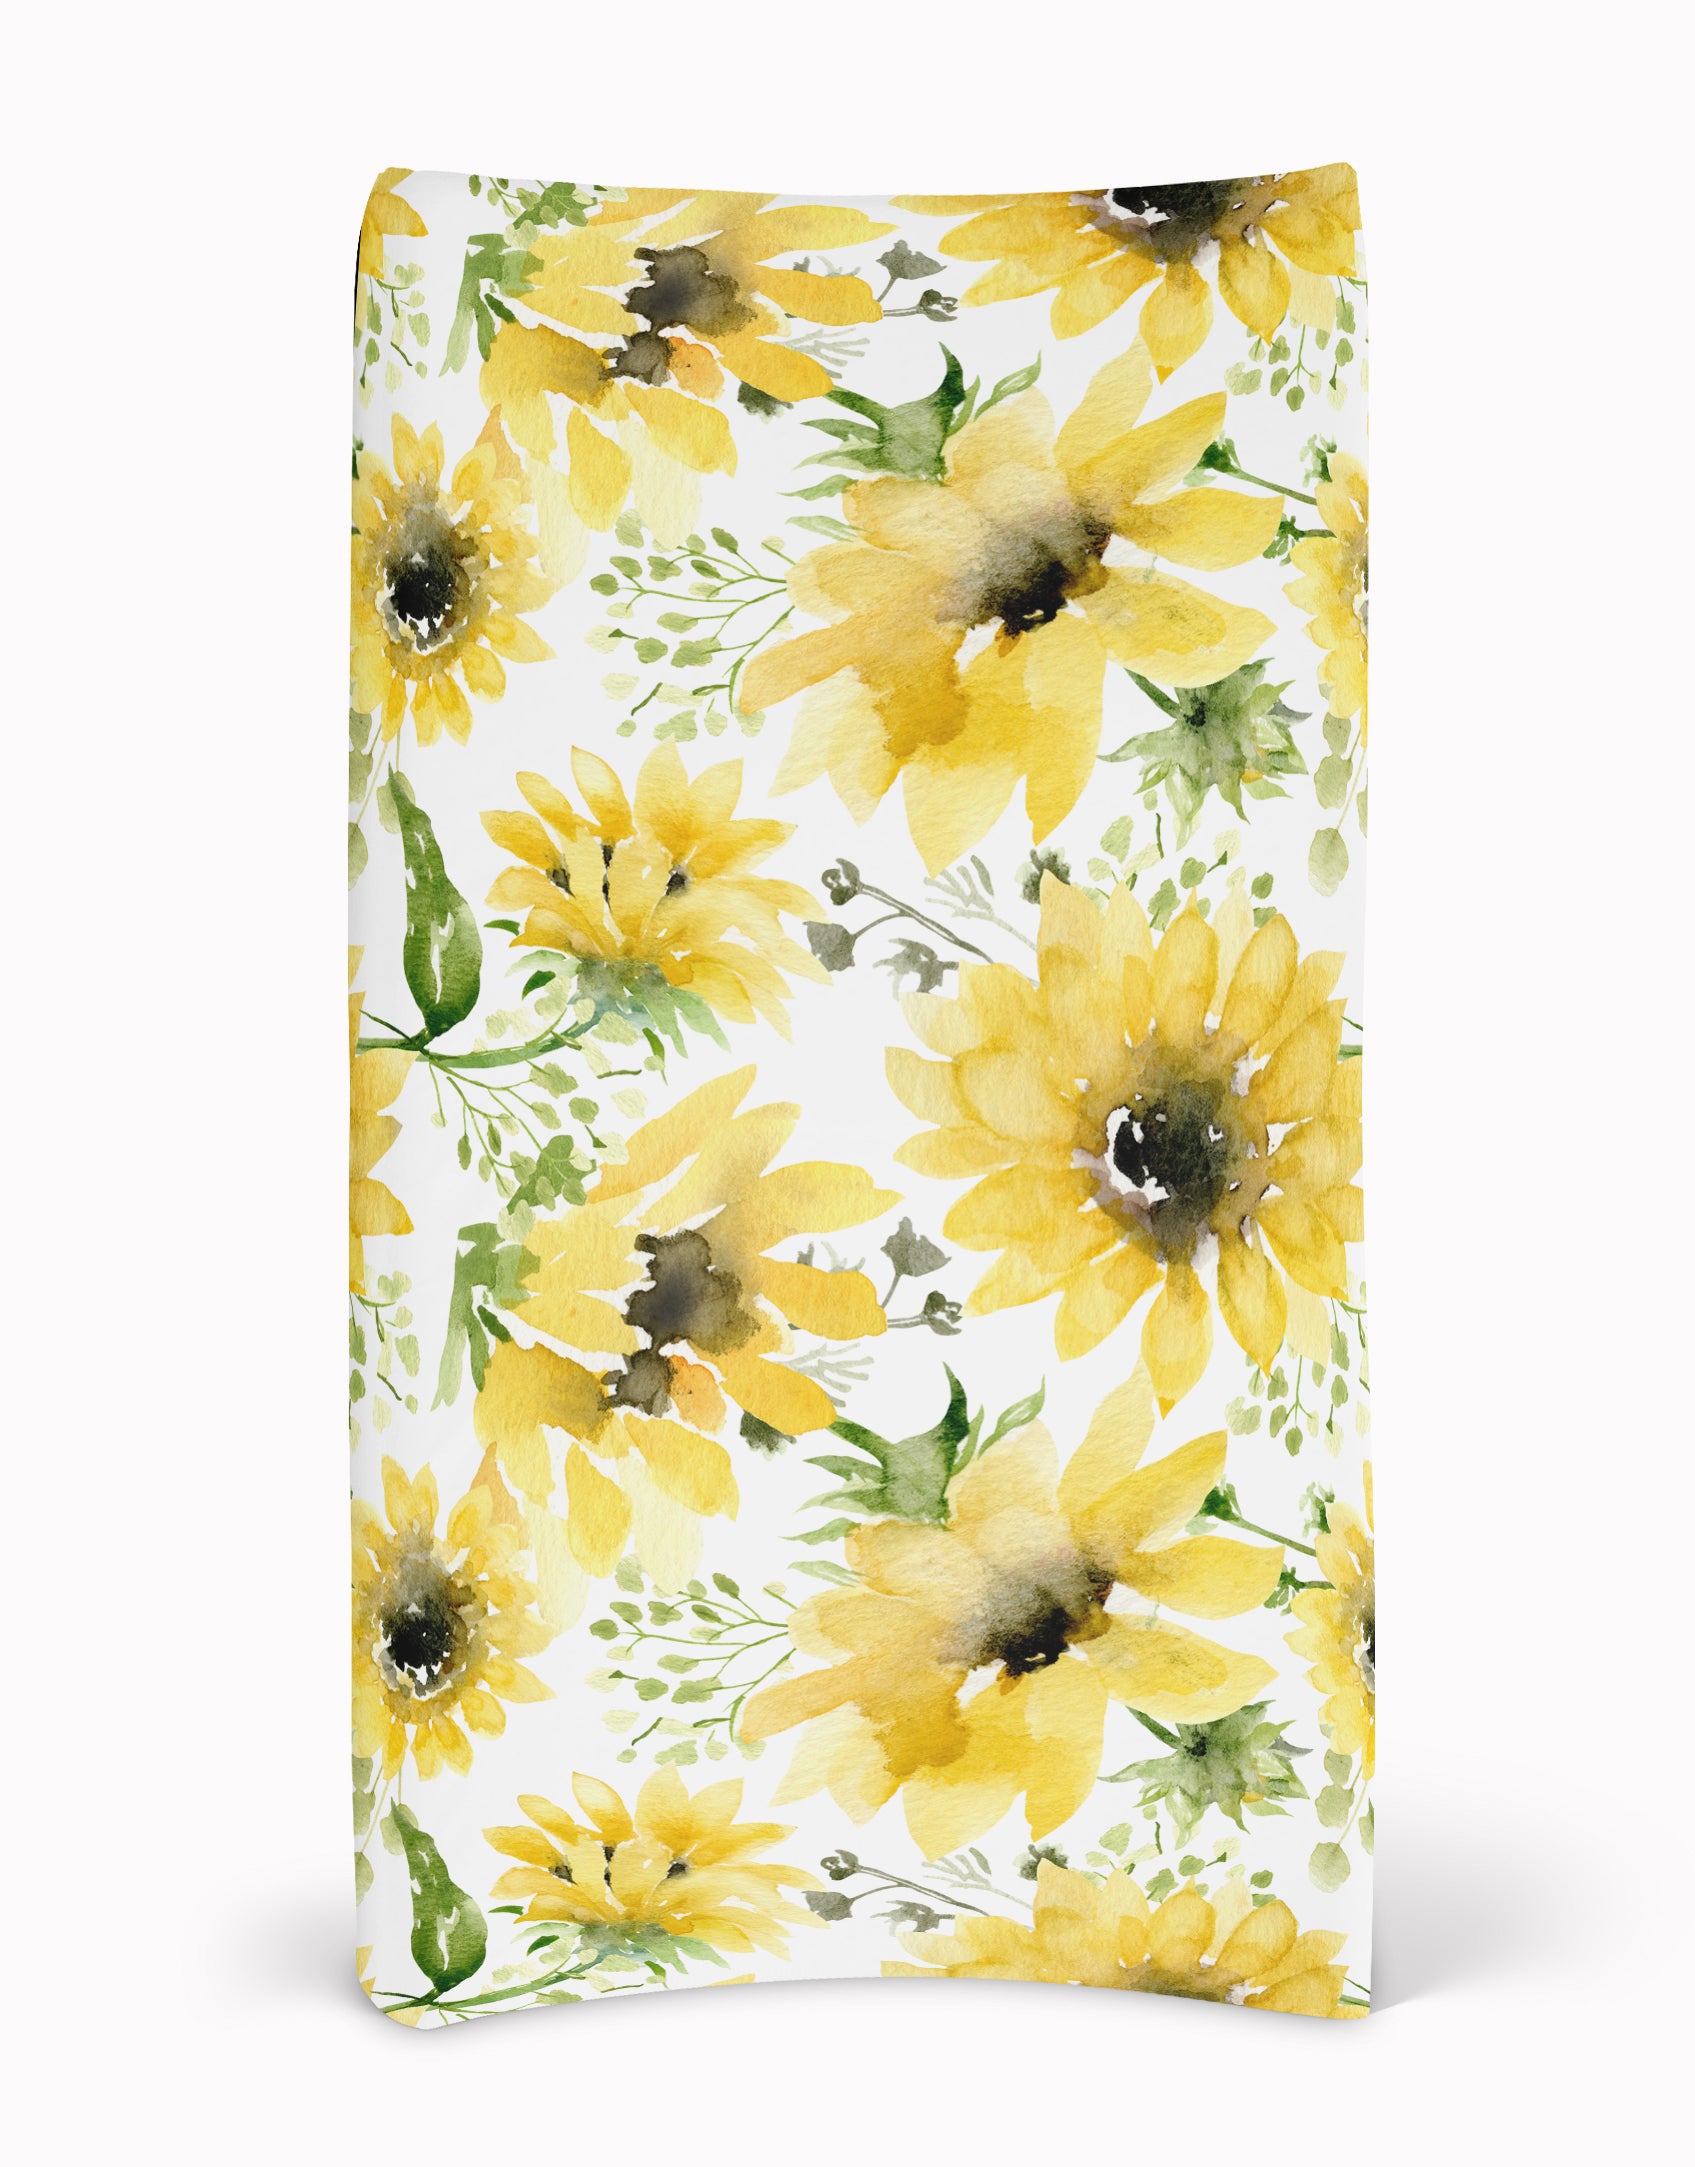 Sunflower Crib Sheet and Change Pad Cover